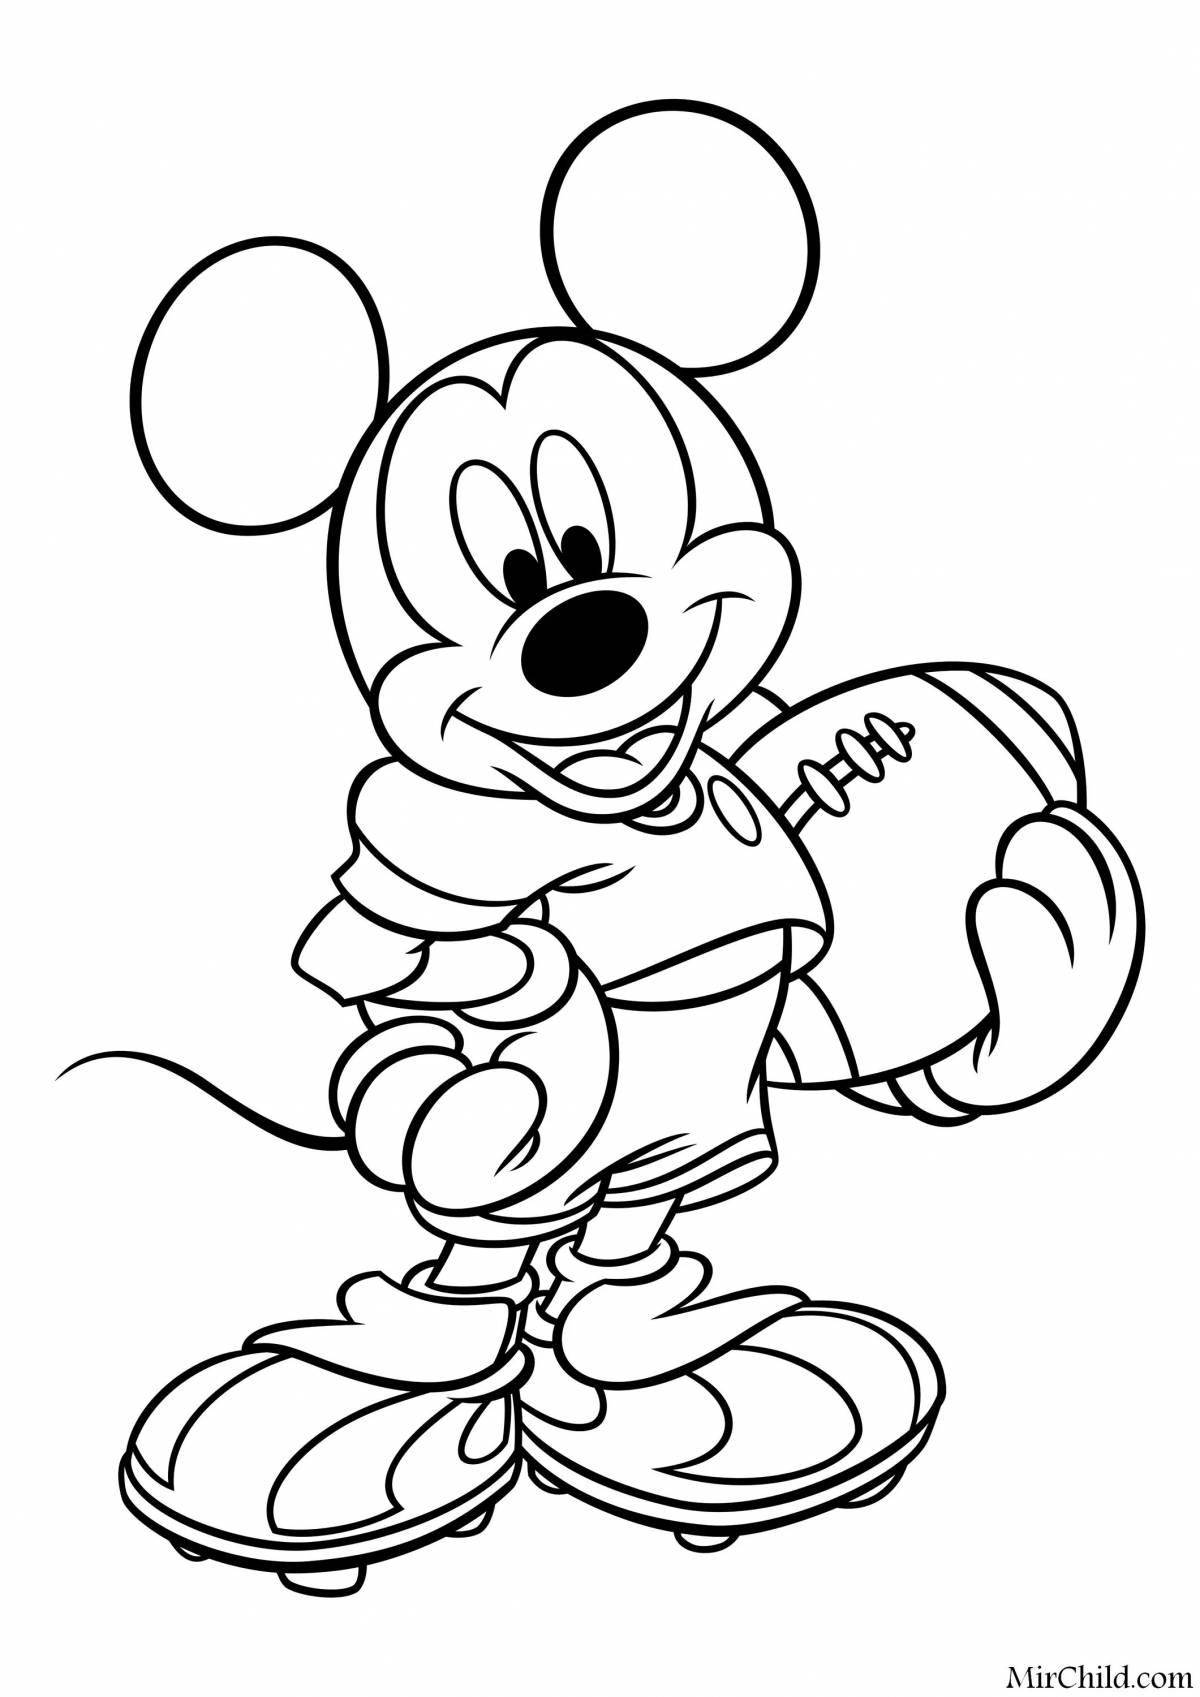 Fairy mickey mouse coloring book for boys